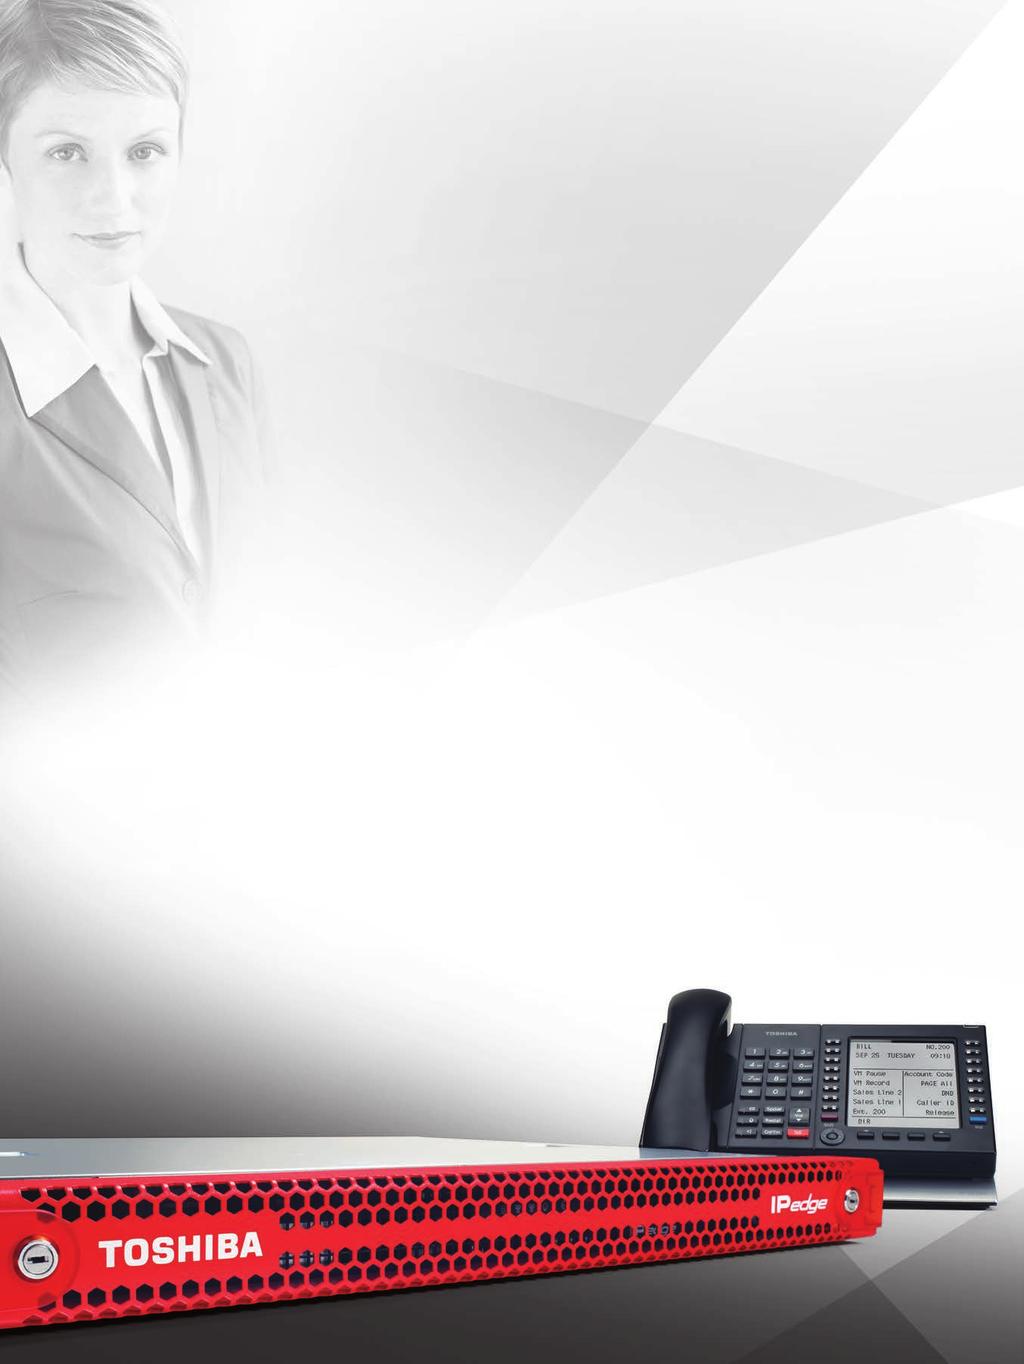 The Right Call For Your Business One of your most important business assets is your IP communication system.